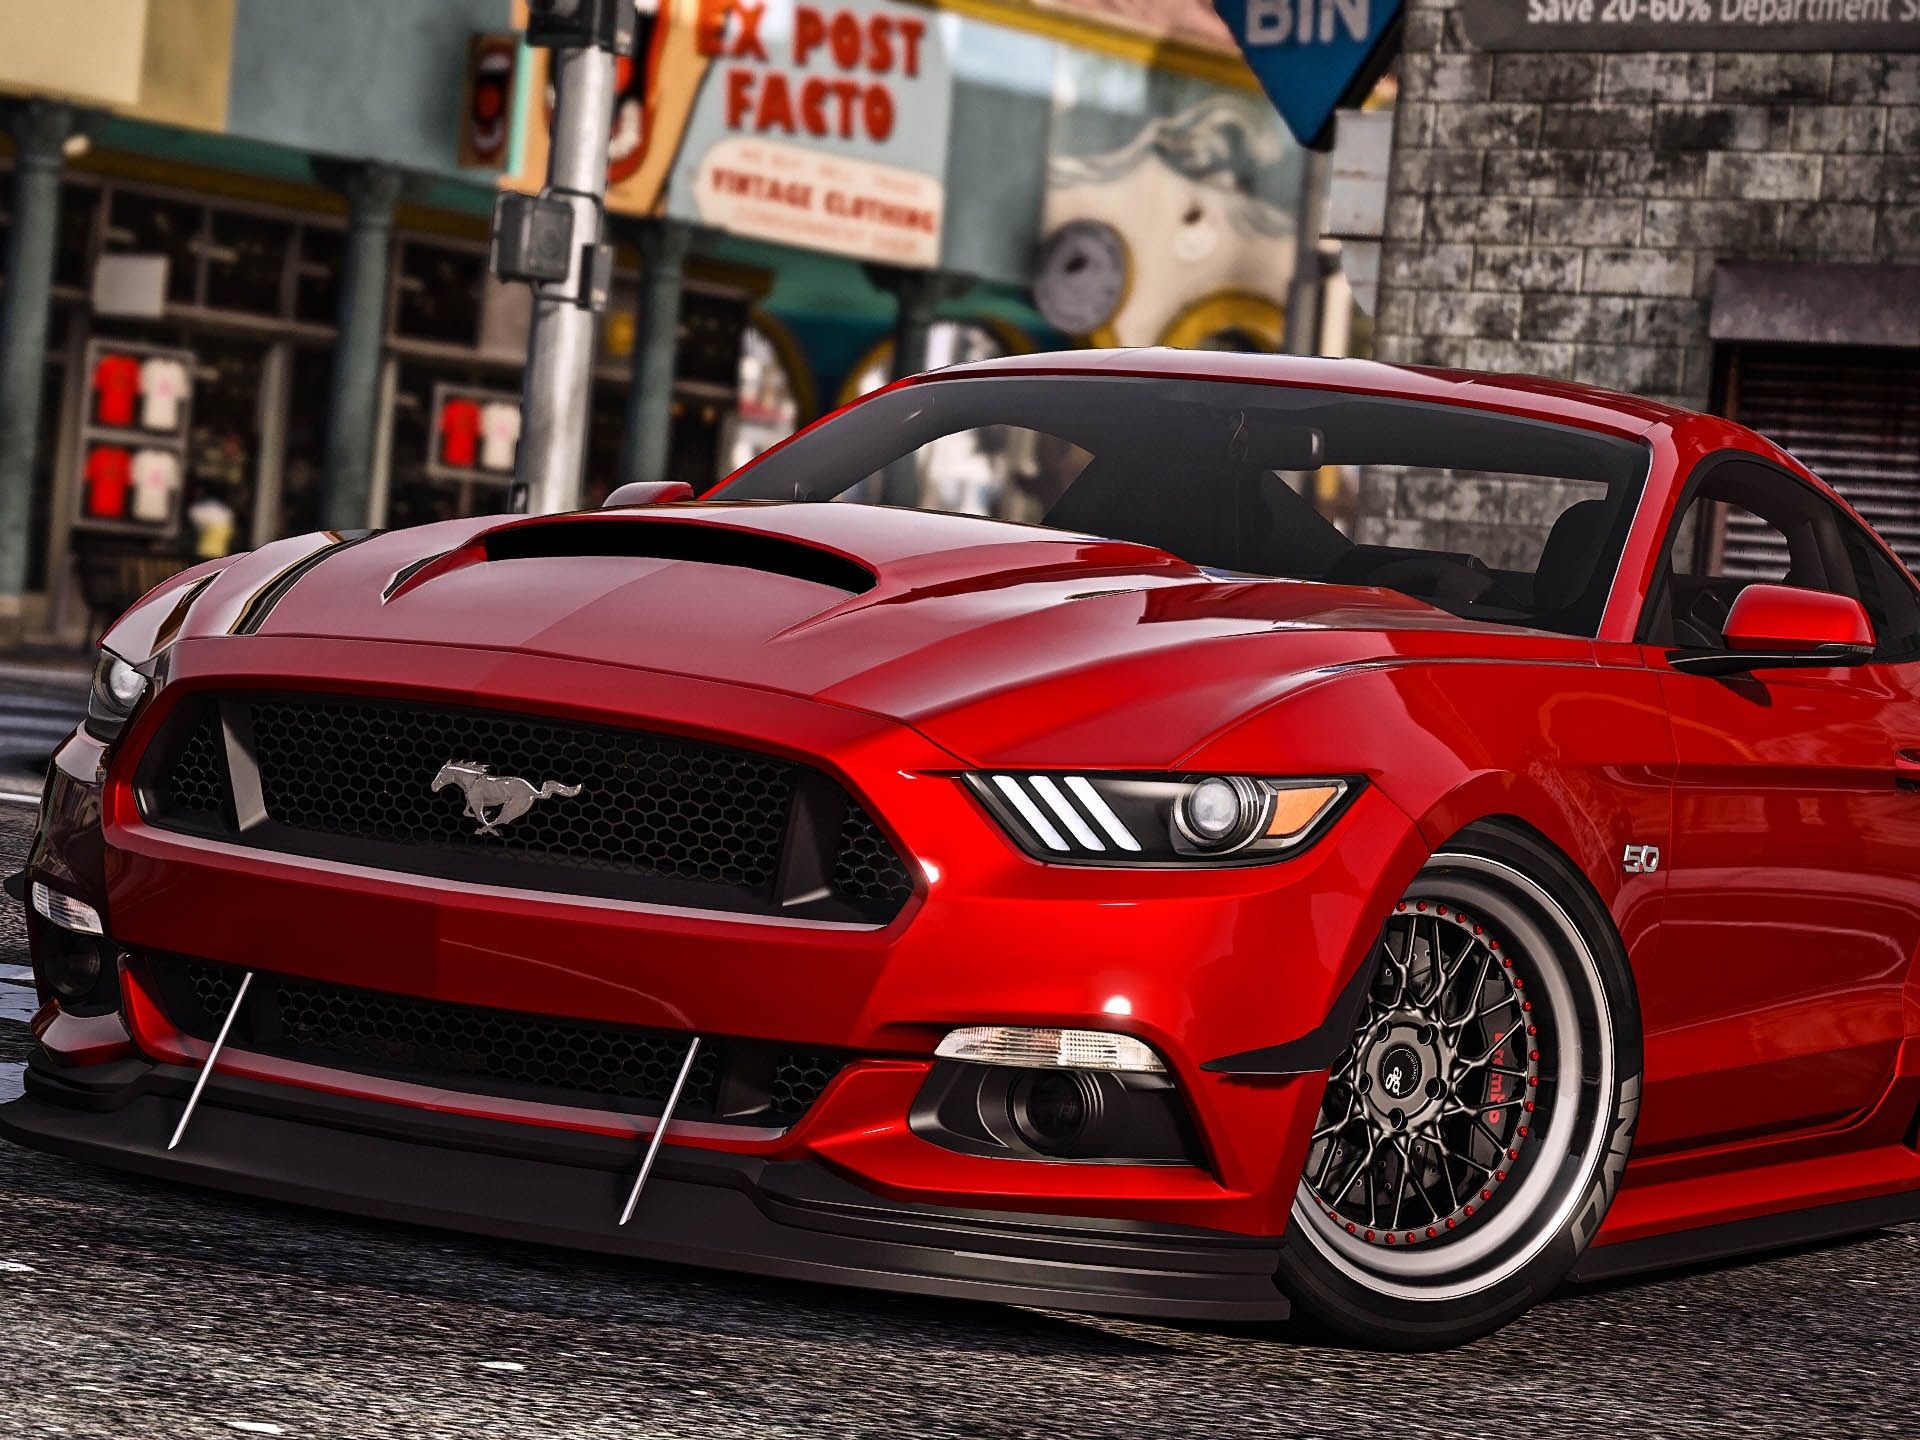 Wallpaper GTA Ford Mustang red car 2560x1440 QHD Picture, Image